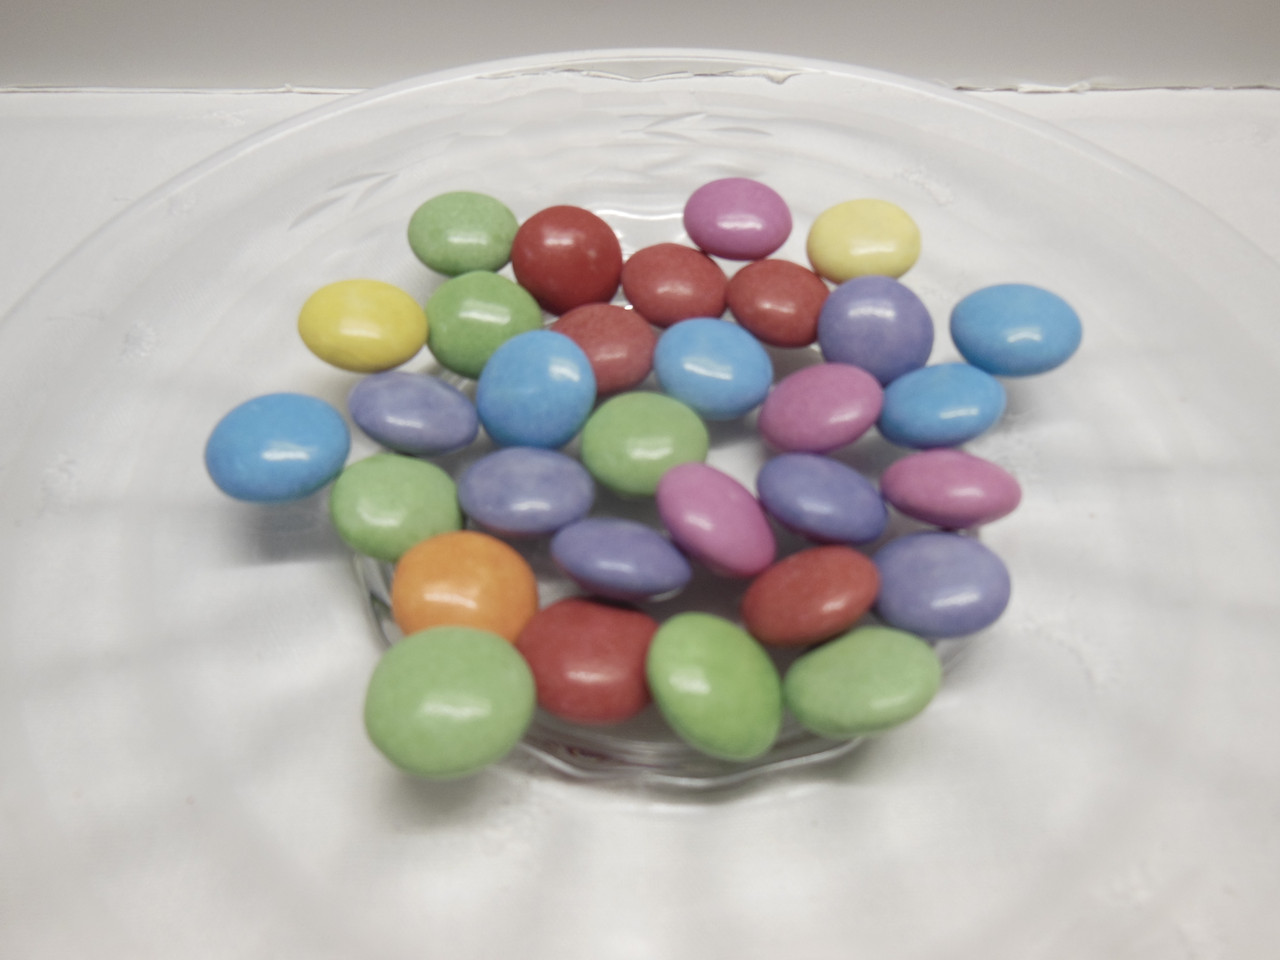 Smarties Manufacturer's Roll 38g Nestle Contains 16 Pieces